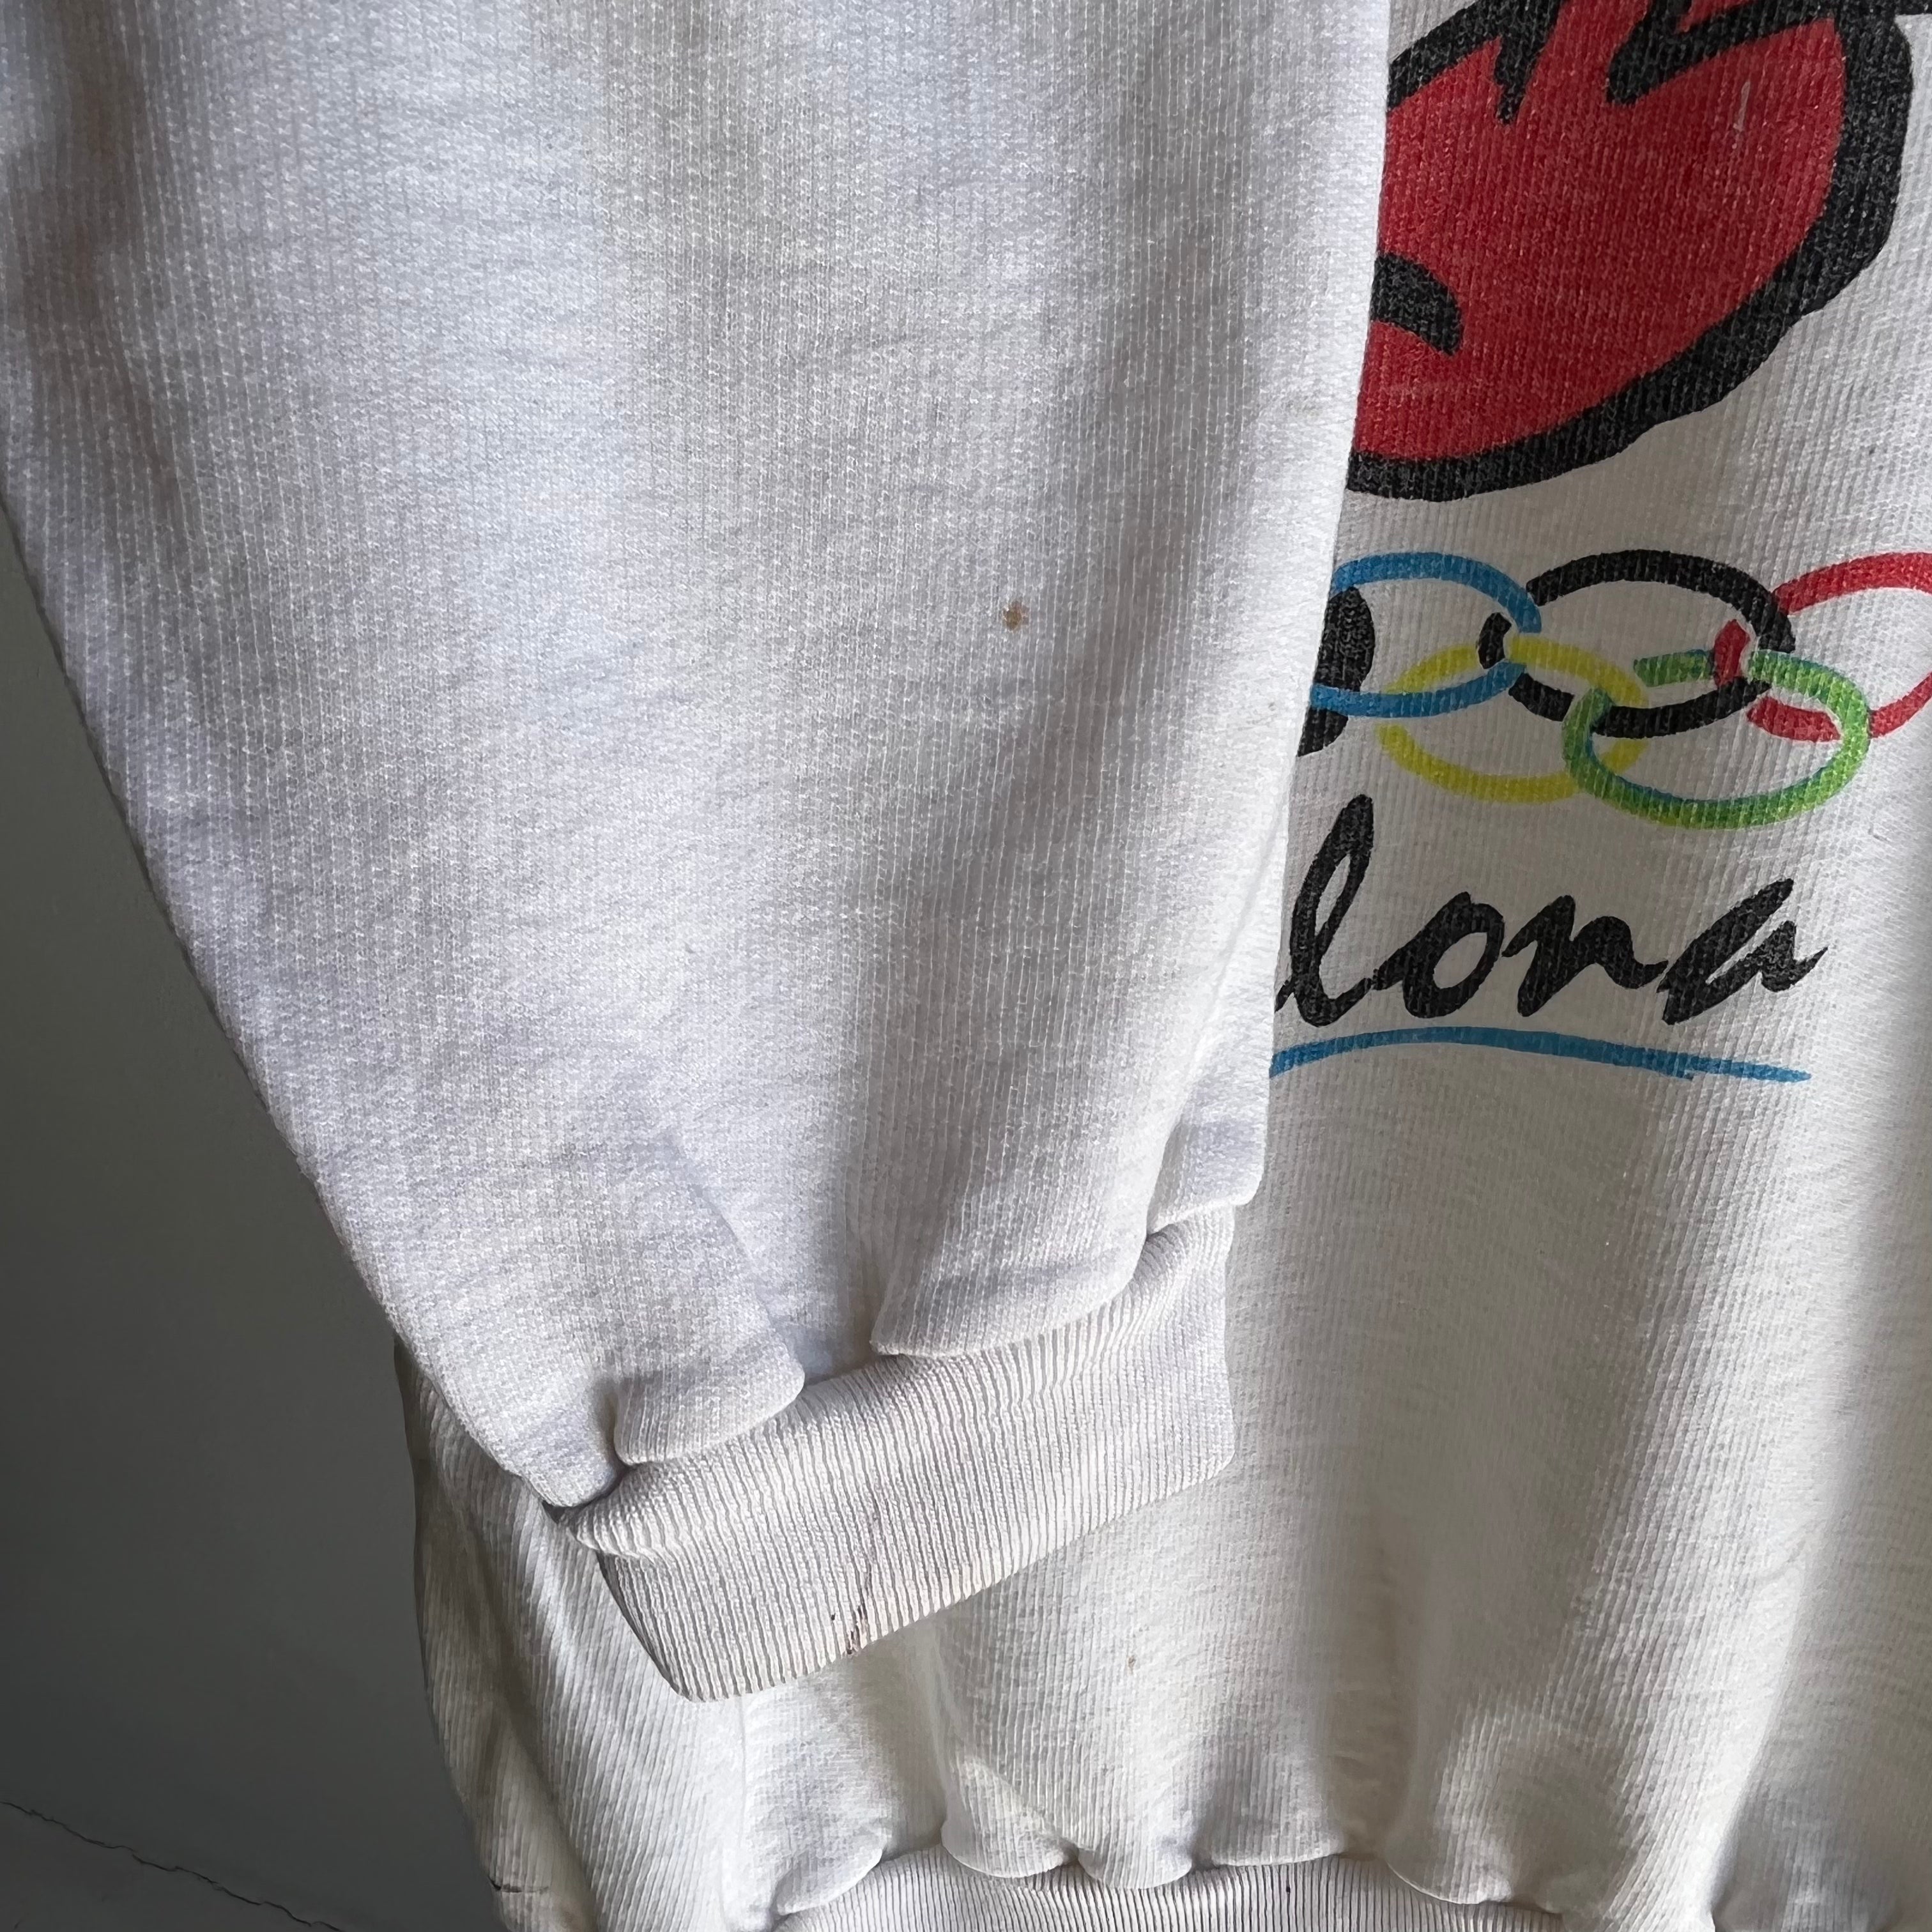 1992 Barcelona Olympic Sweatshirt - Made in Spain - Staining